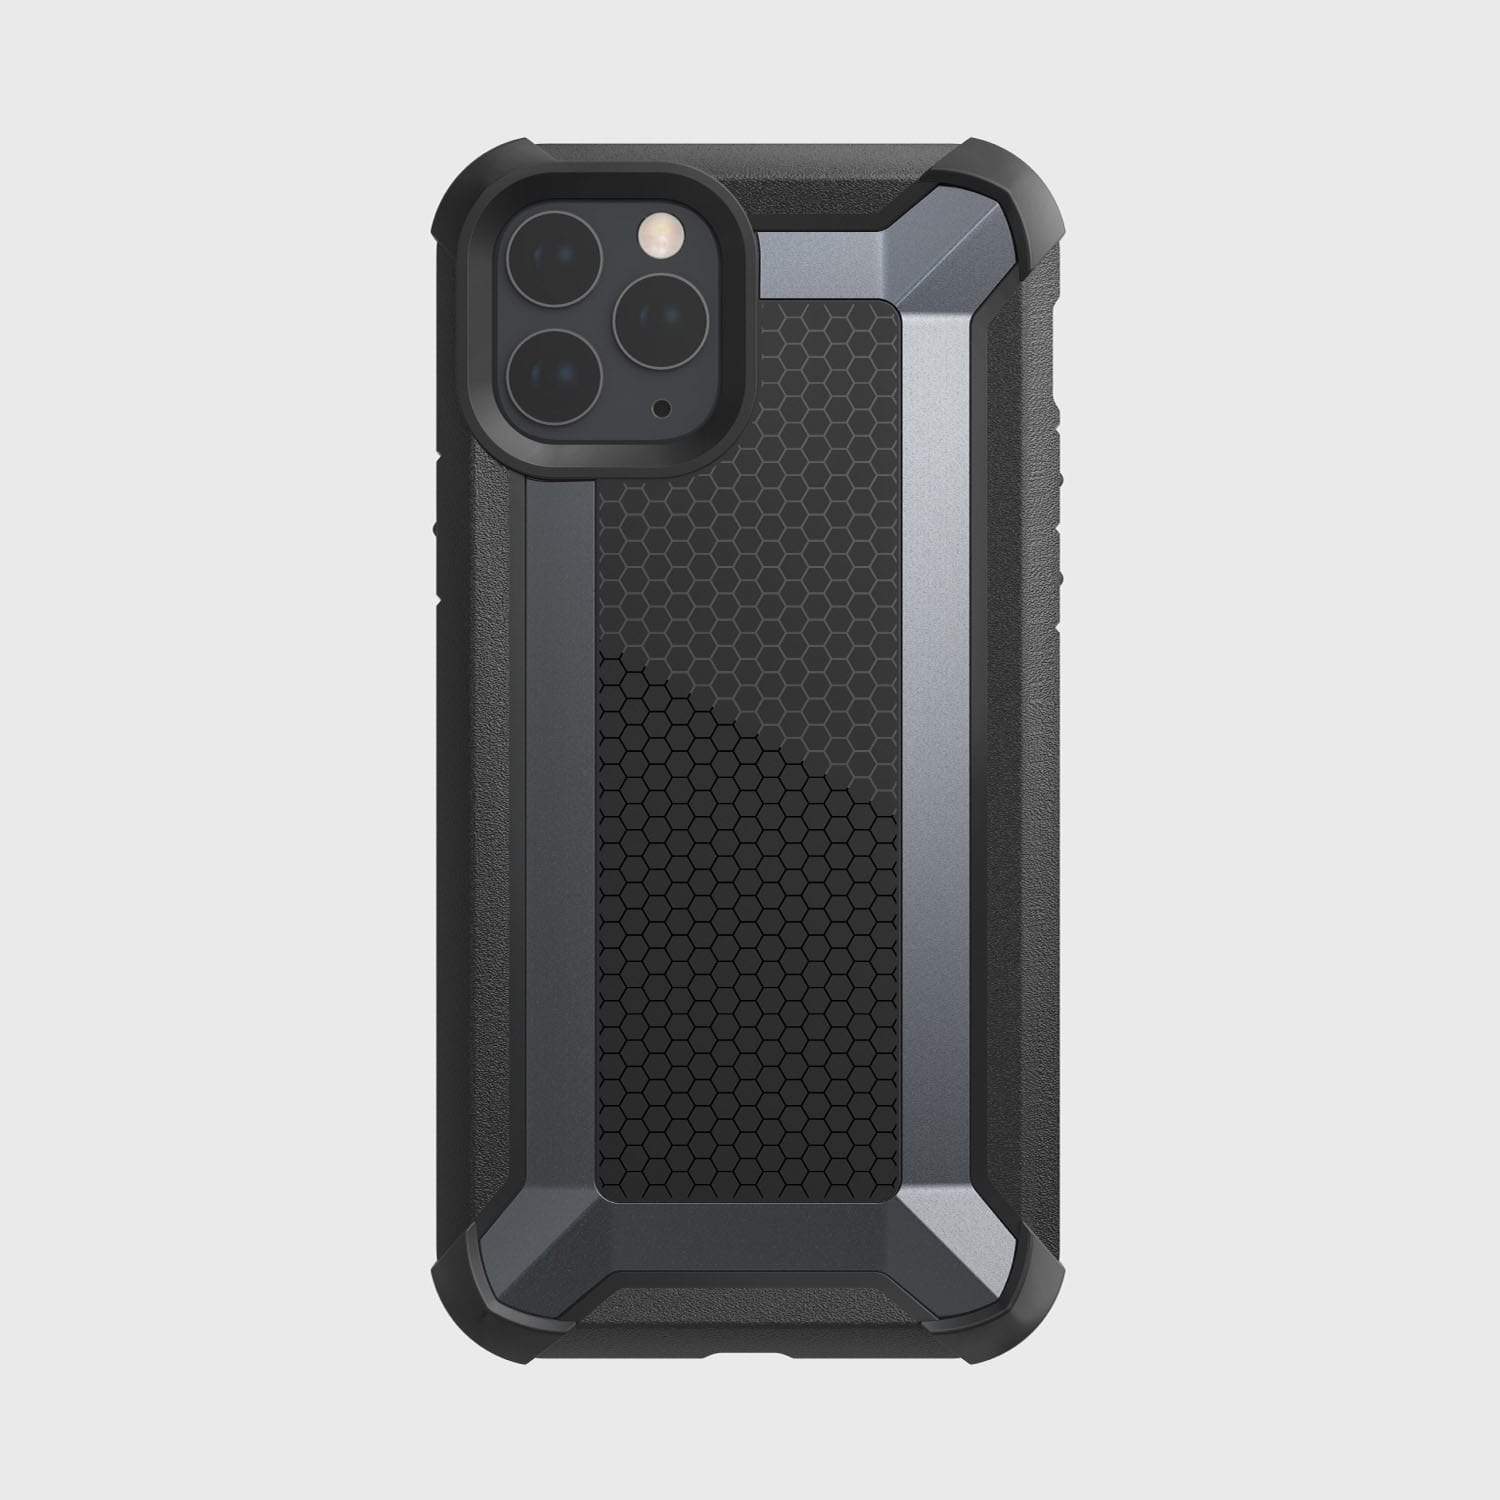 The iPhone 11 Pro Max Case - TACTICAL by Raptic is shown in black, featuring a shock-absorbing rubber exterior.